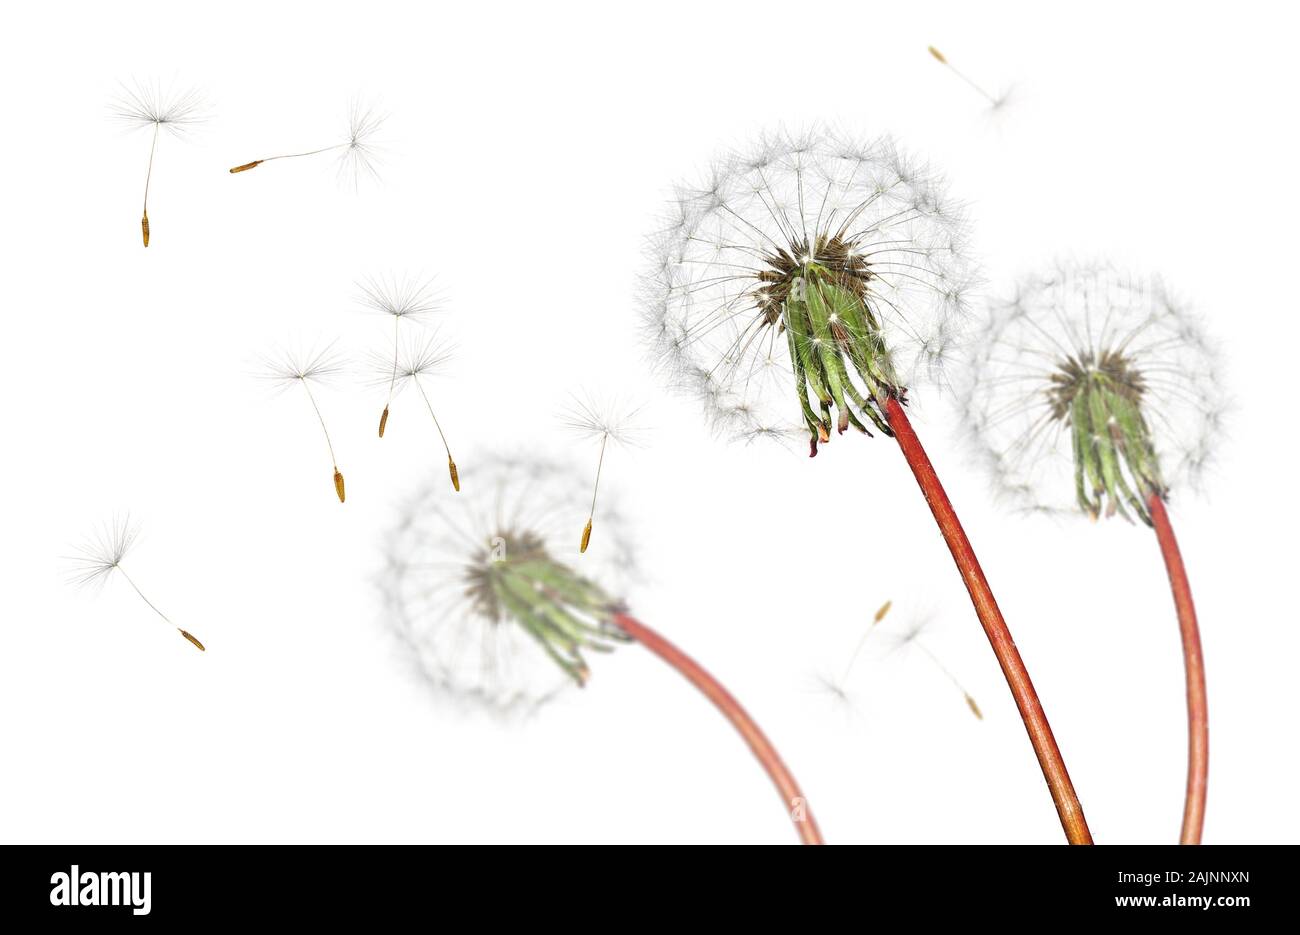 Airborne dandelion seeds flying in the wind, isolated on a white background Stock Photo